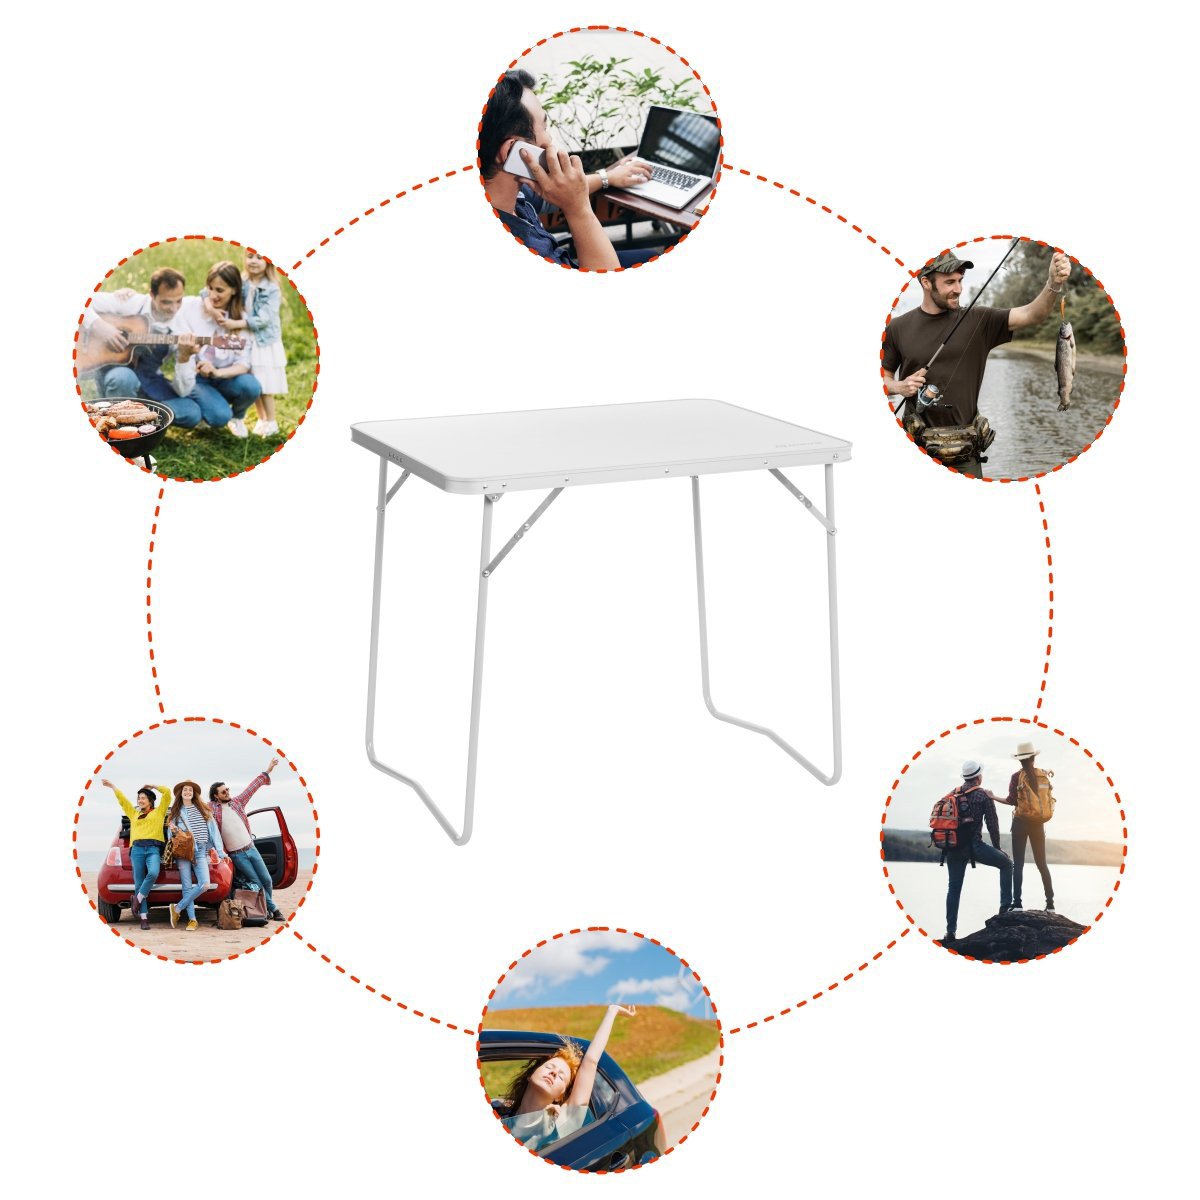 Portable Lightweight Steel Folding Outdoor Table could be used for a plenty of activities